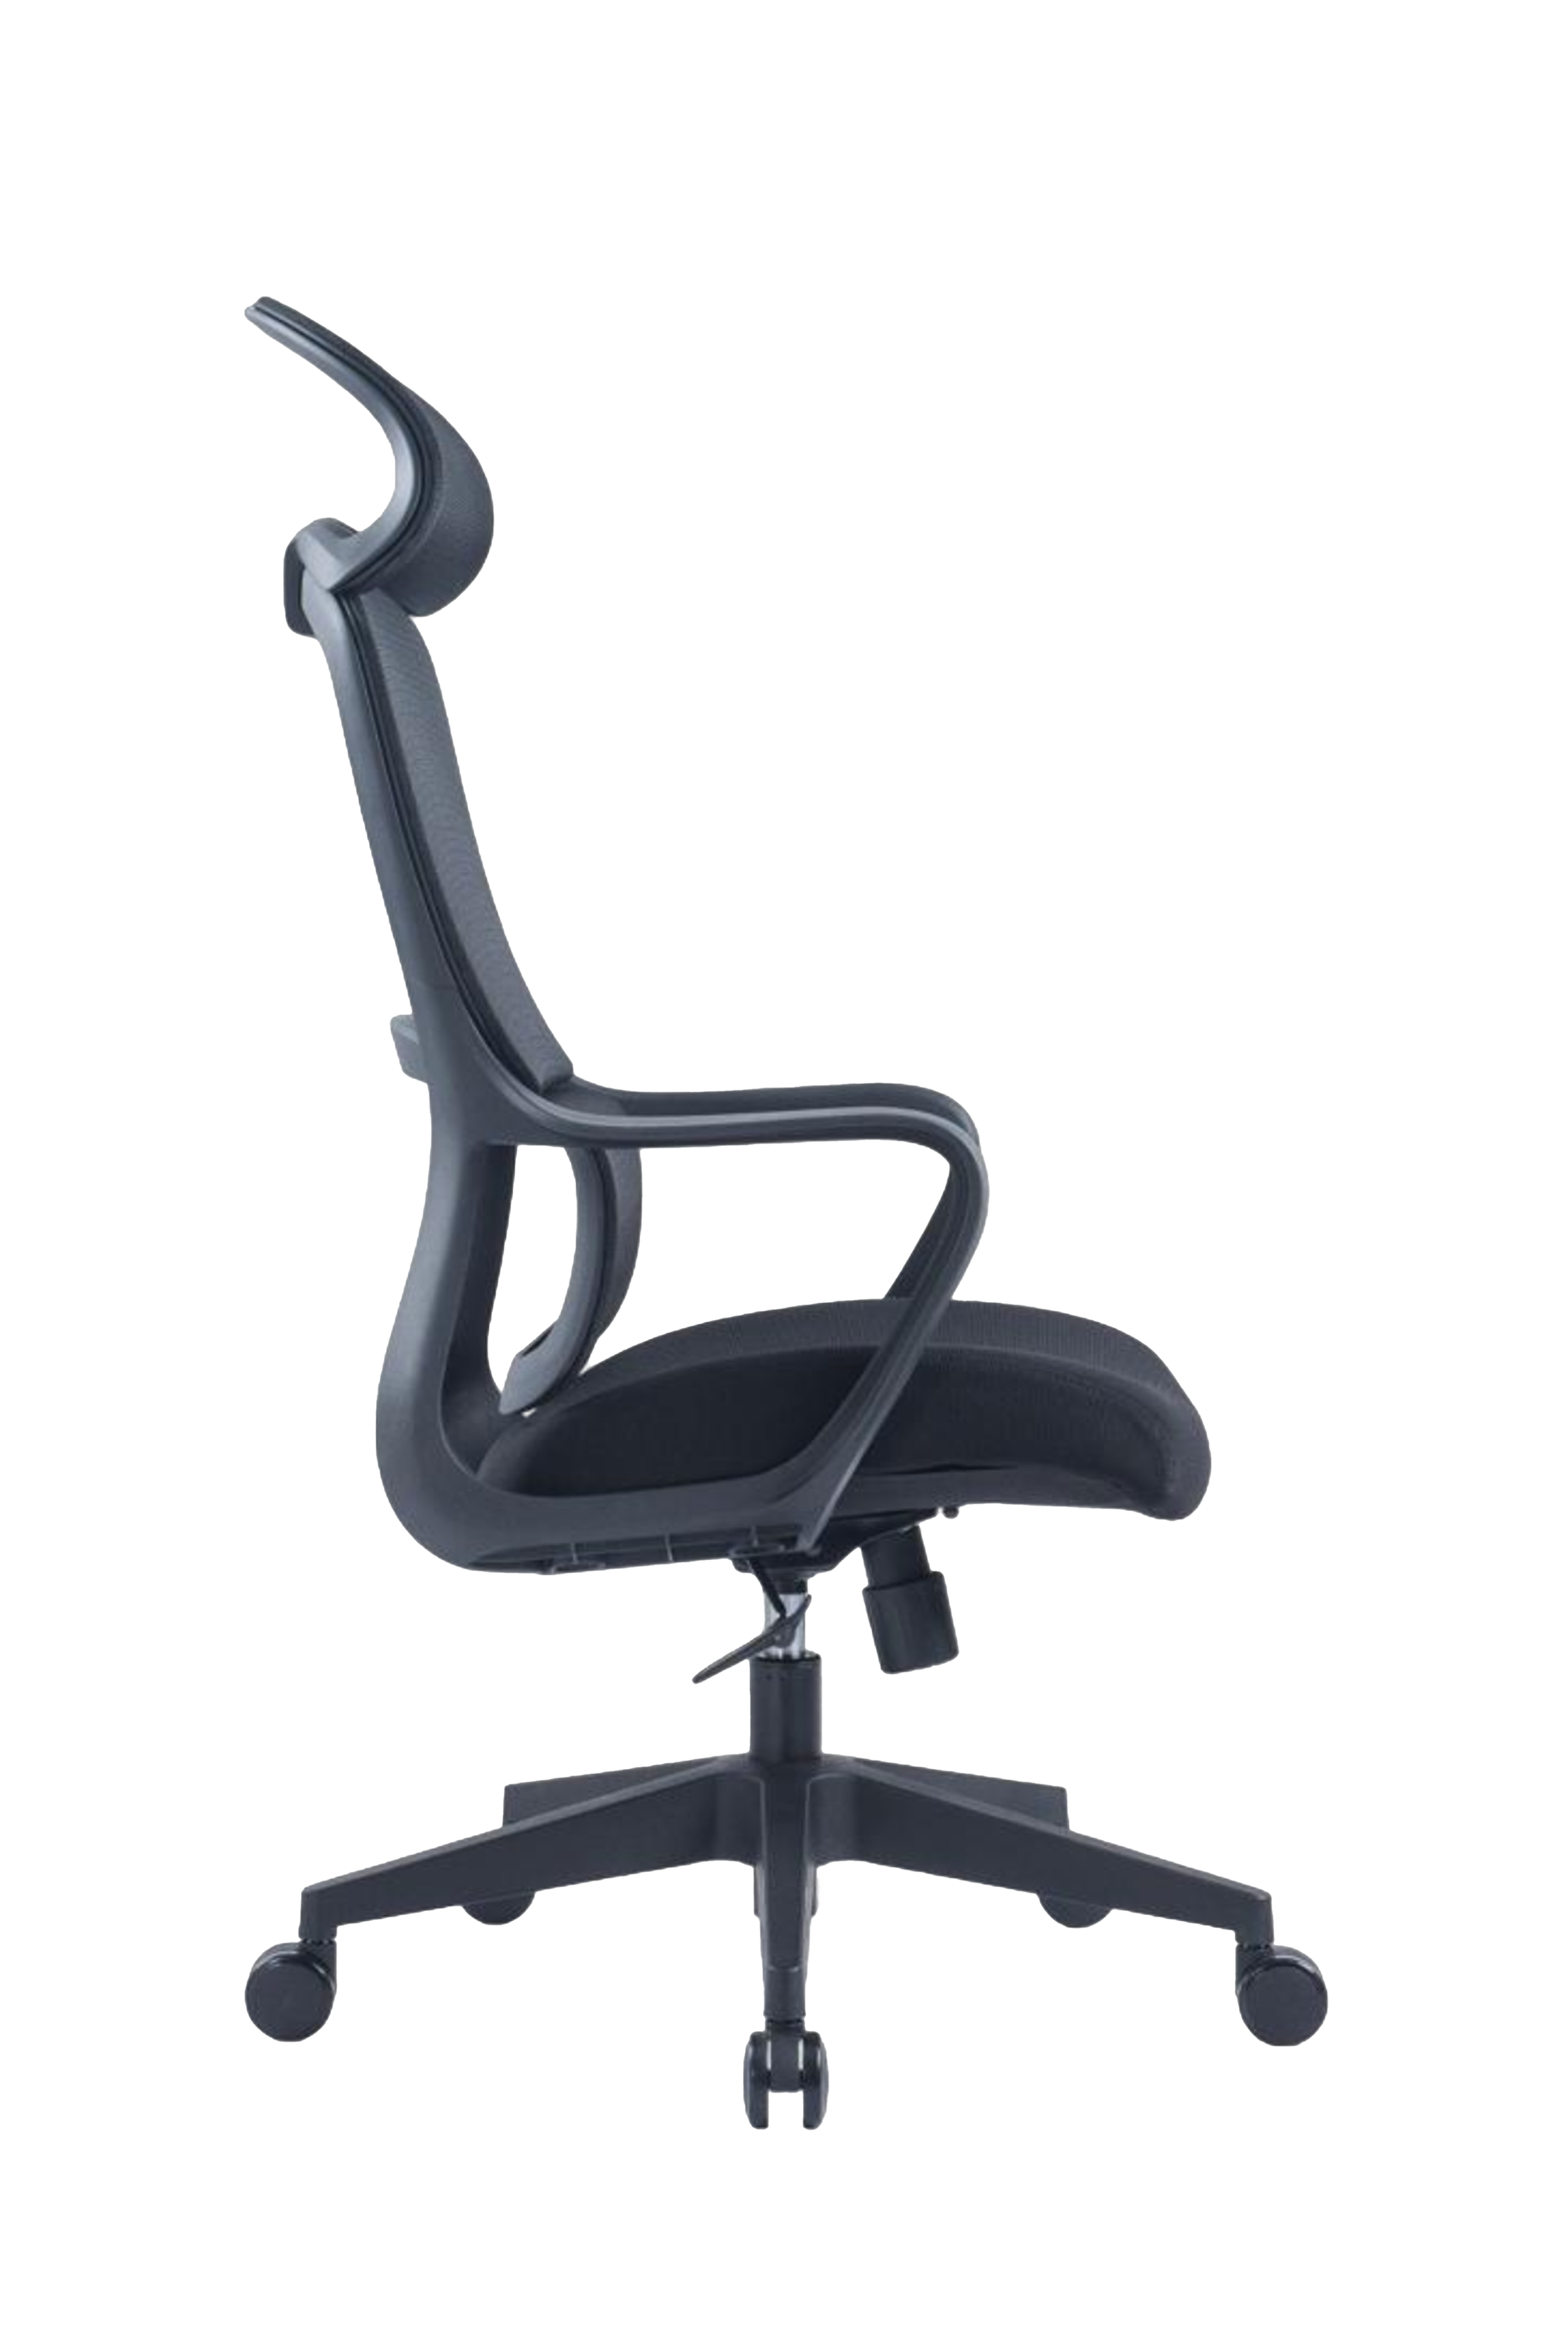 Leo High Back Ergonomic Office Chair With Cushion Seat And Nylon Base - Black